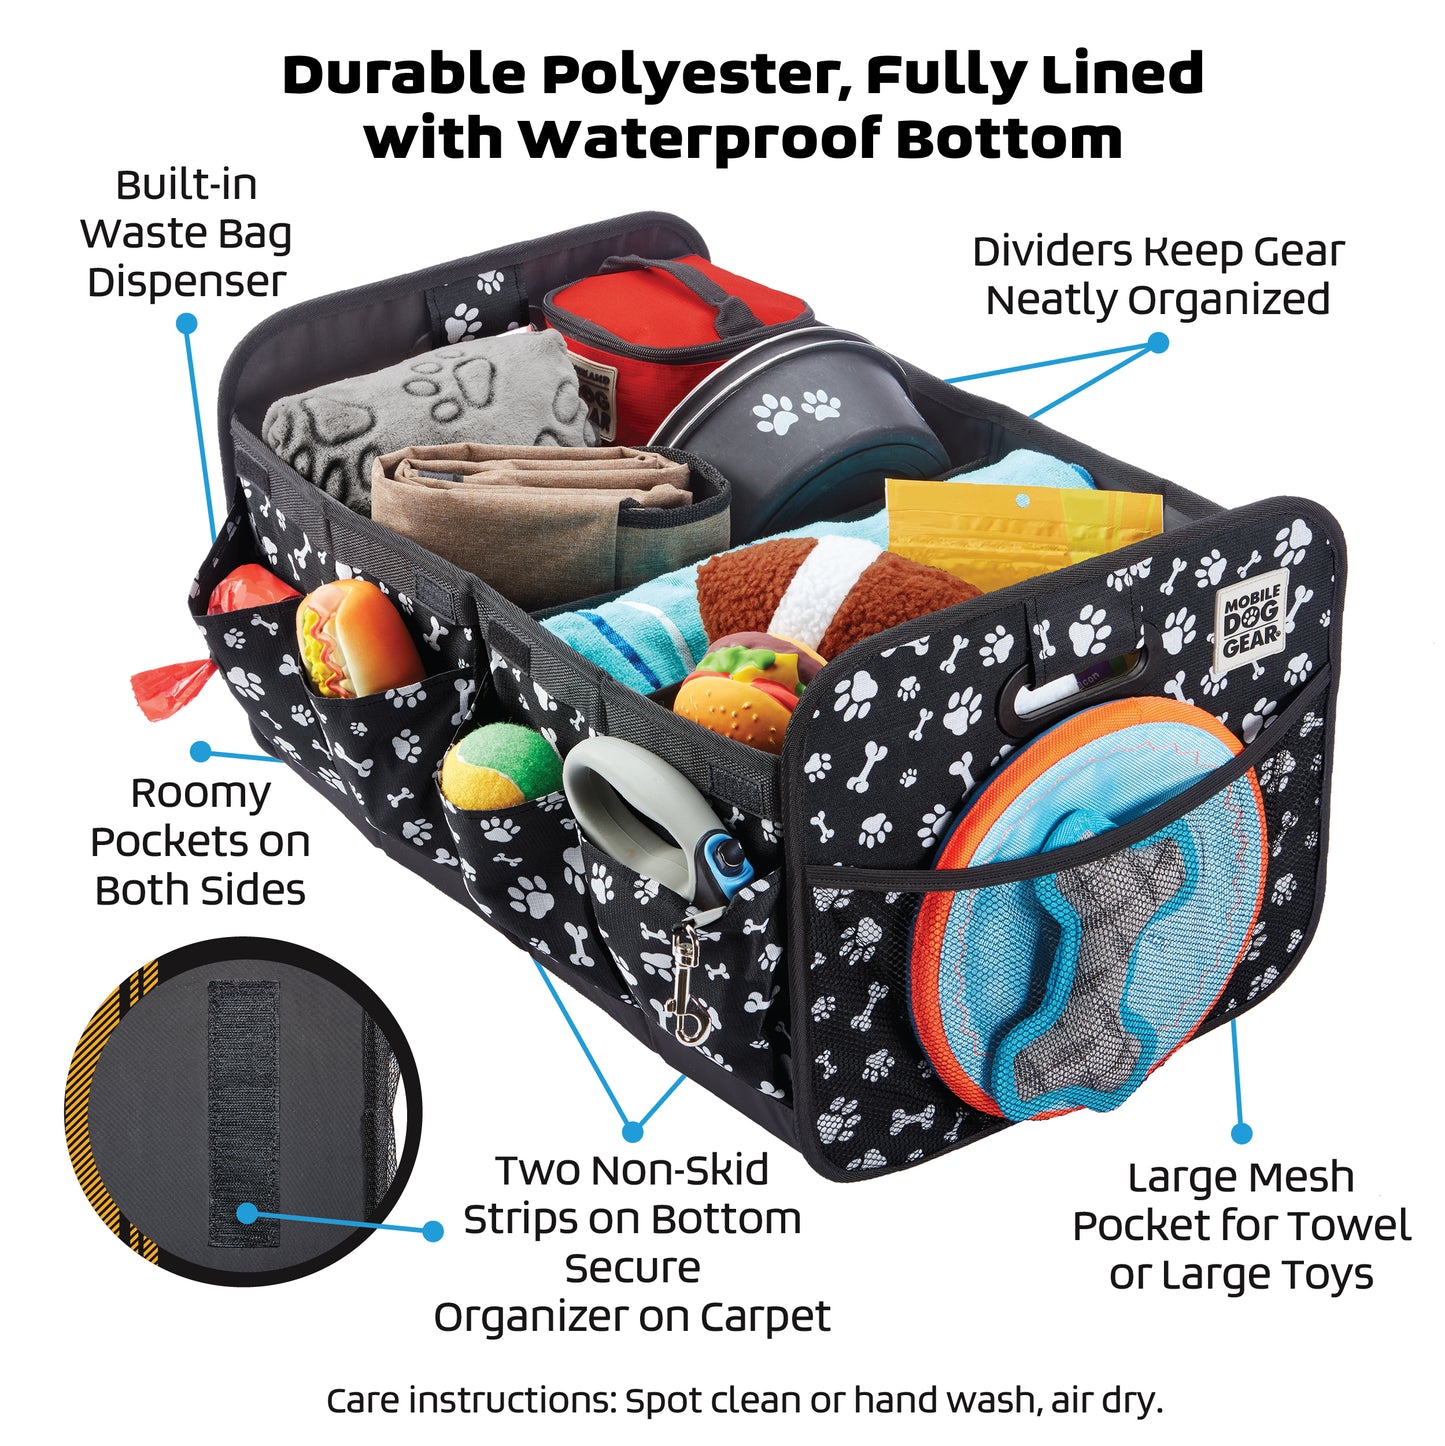 On-the-Go Companion: The Mobile Dog Gear Collapsible Organizer for Convenient Travel with Your Pet